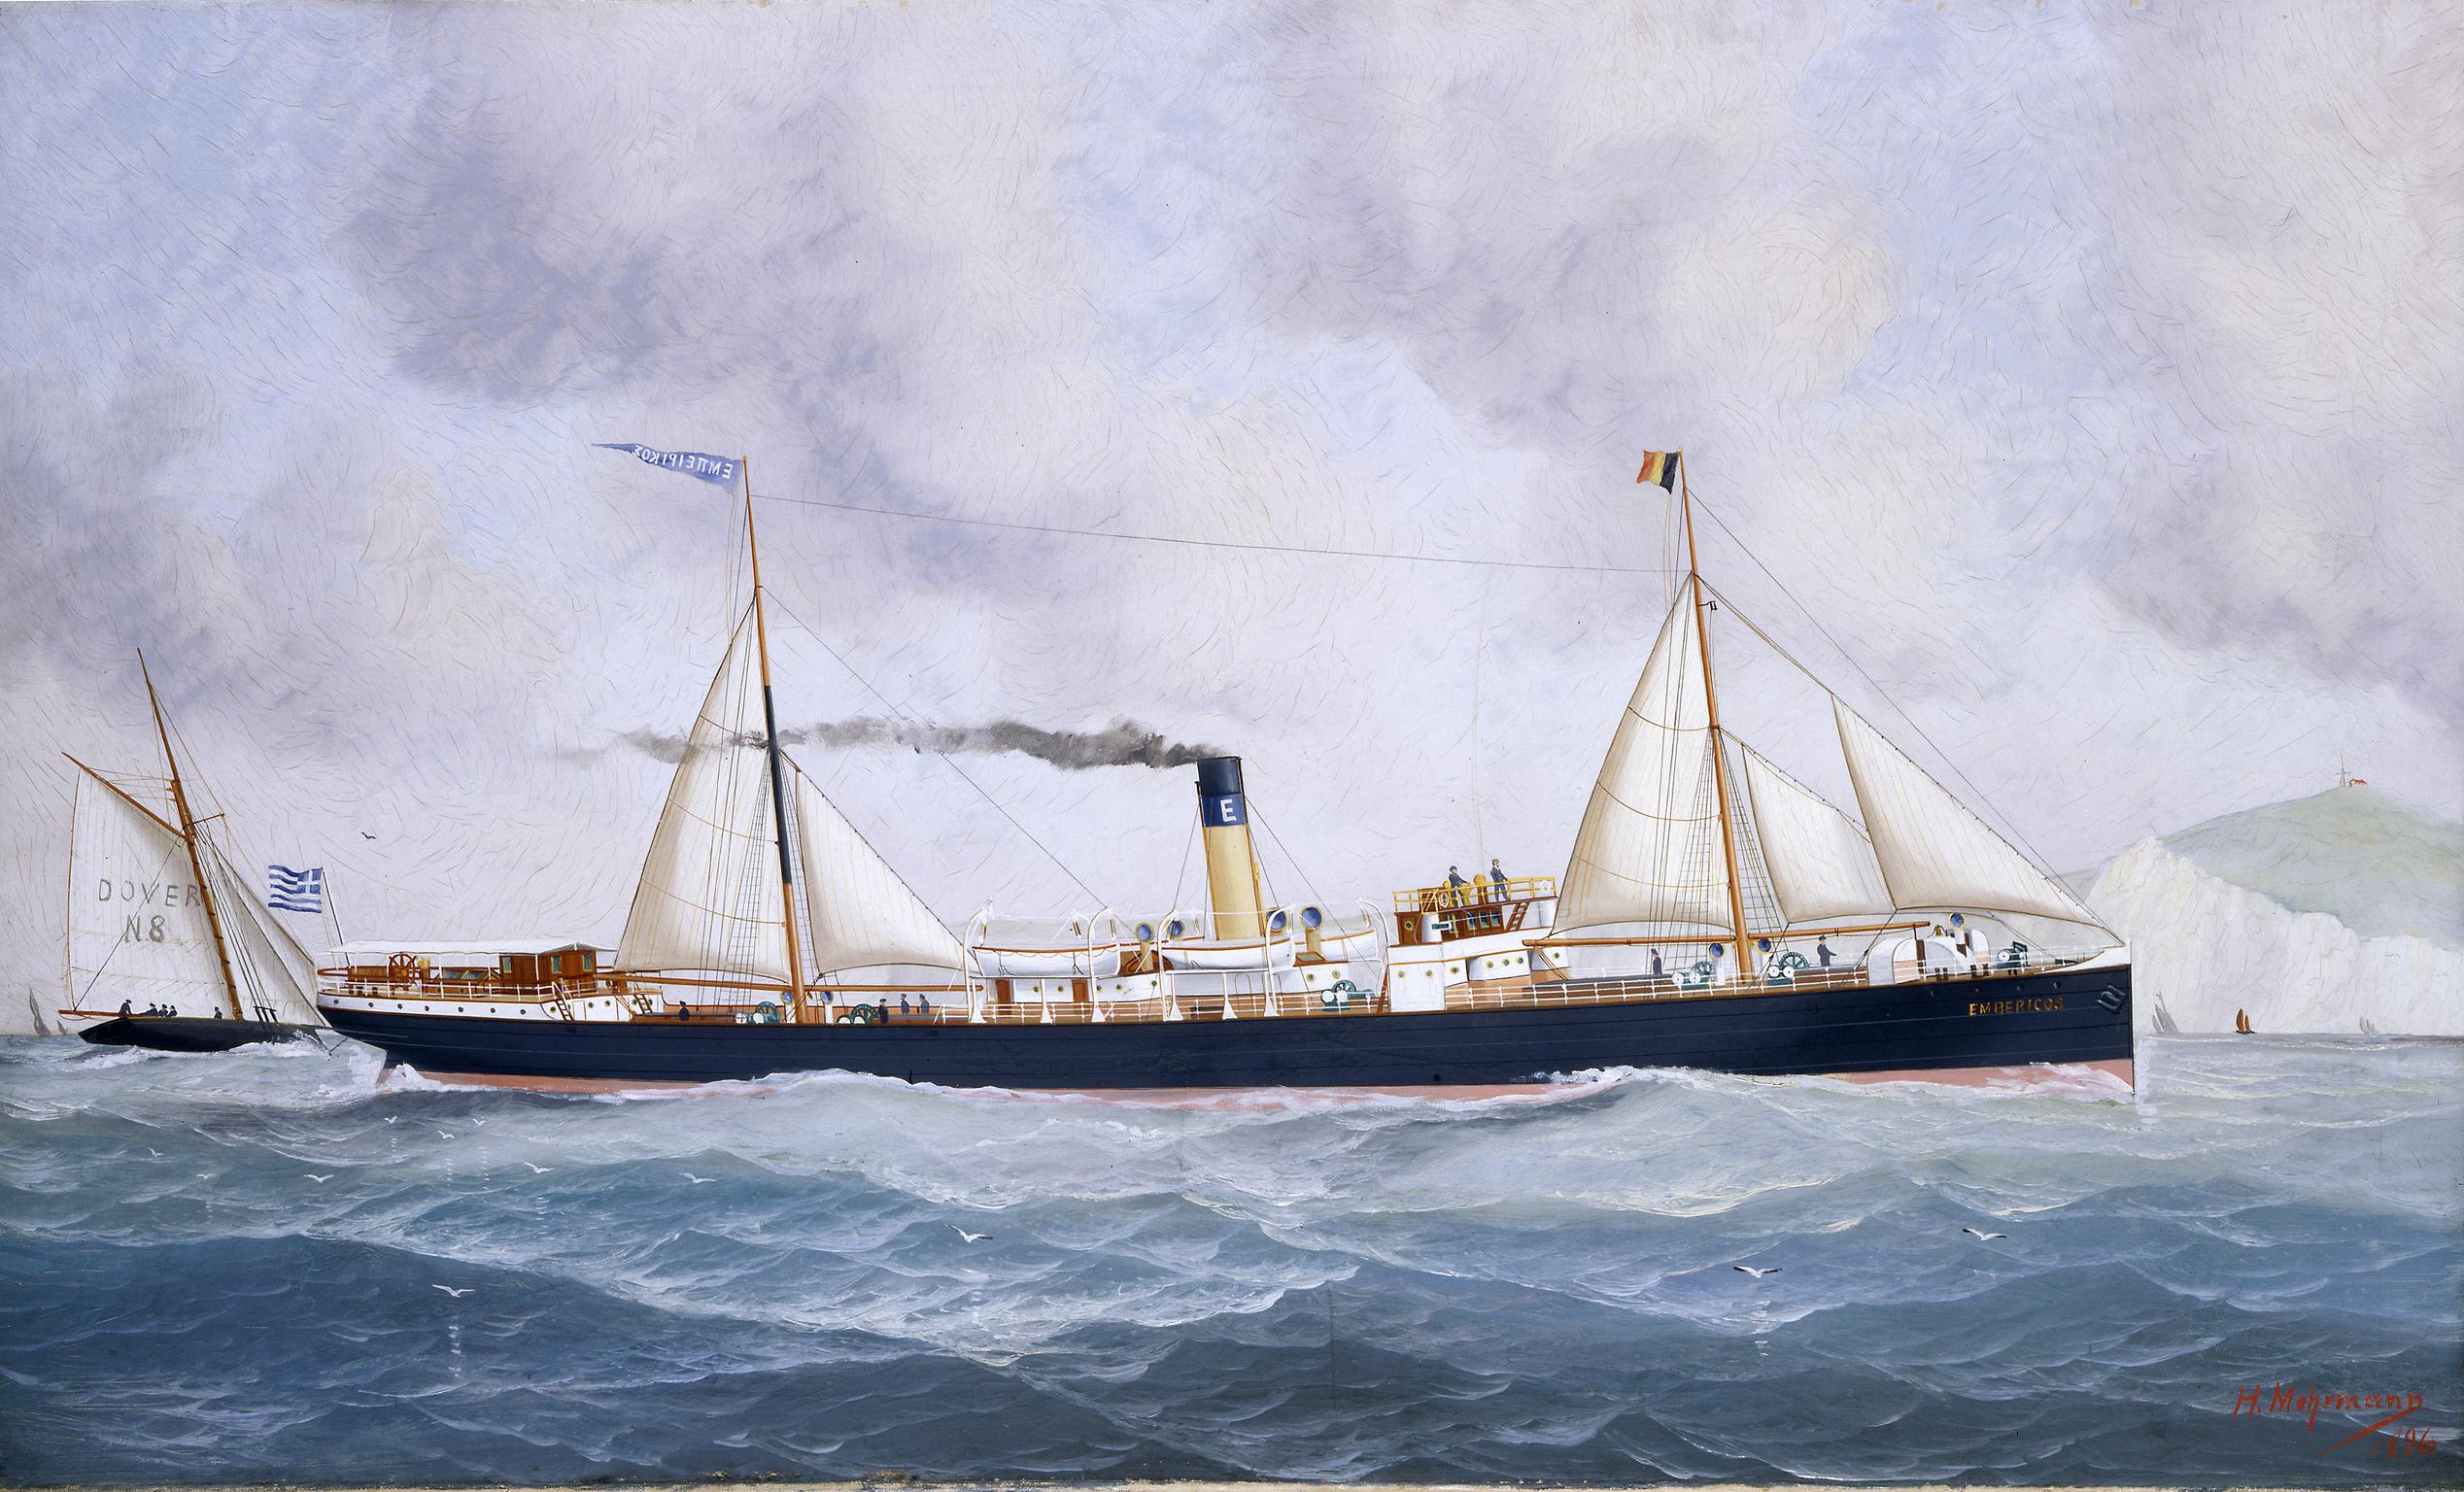 S.S. EMBIRICOS Off Dover (painting)